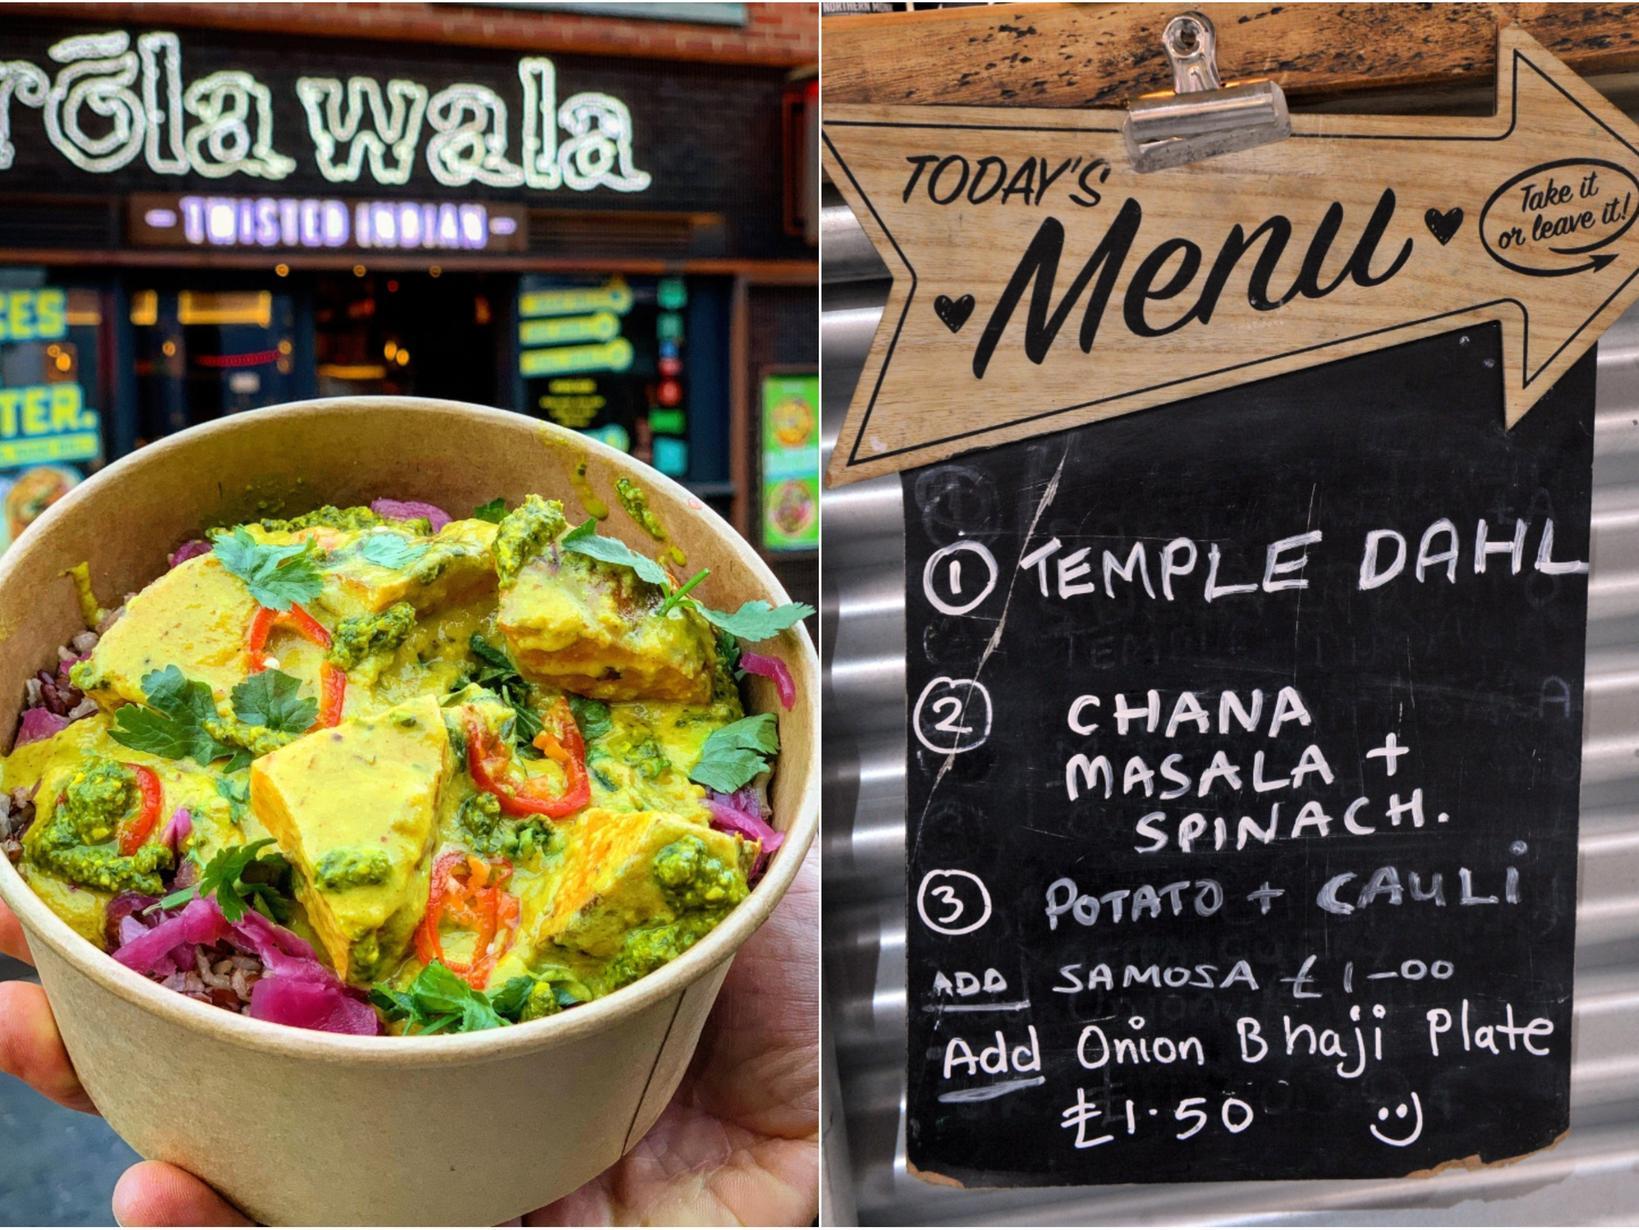 The 16 best cheap Indian restaurants and street food in Leeds - according to TripAdvisor